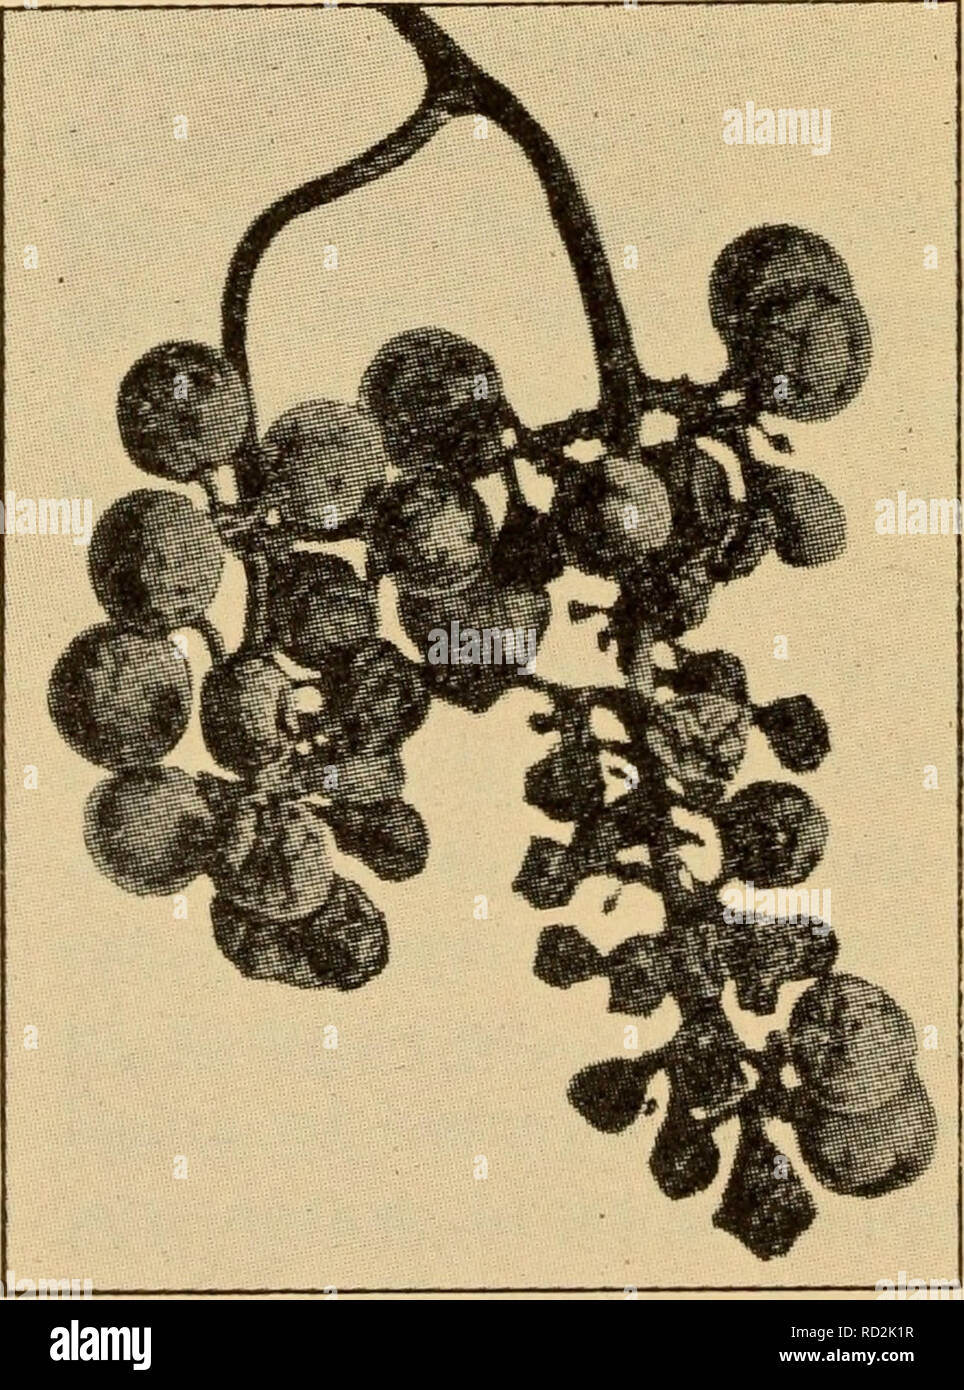 . Elementary principles of agriculture; a text book for the common schools. Agriculture. Fig.91. The &quot;brown rot&quot; of plums and peaches leaves &quot;mummies&quot; on the trees.. Fig. 92. Black rot of grape may be pre- vented by timely use of Bordeaux mixture vitriol) known as Bor- deaux mixture (given in the Appendix) is most often used. The plants are sprayed with a very dilute solution, so that a thin film of the poison covers the leaves, stems, buds, and fruit of the plant. Spores on the surface of thoroughly sprayed plants are killed, as Ukewise others that fall on the plants. It i Stock Photo